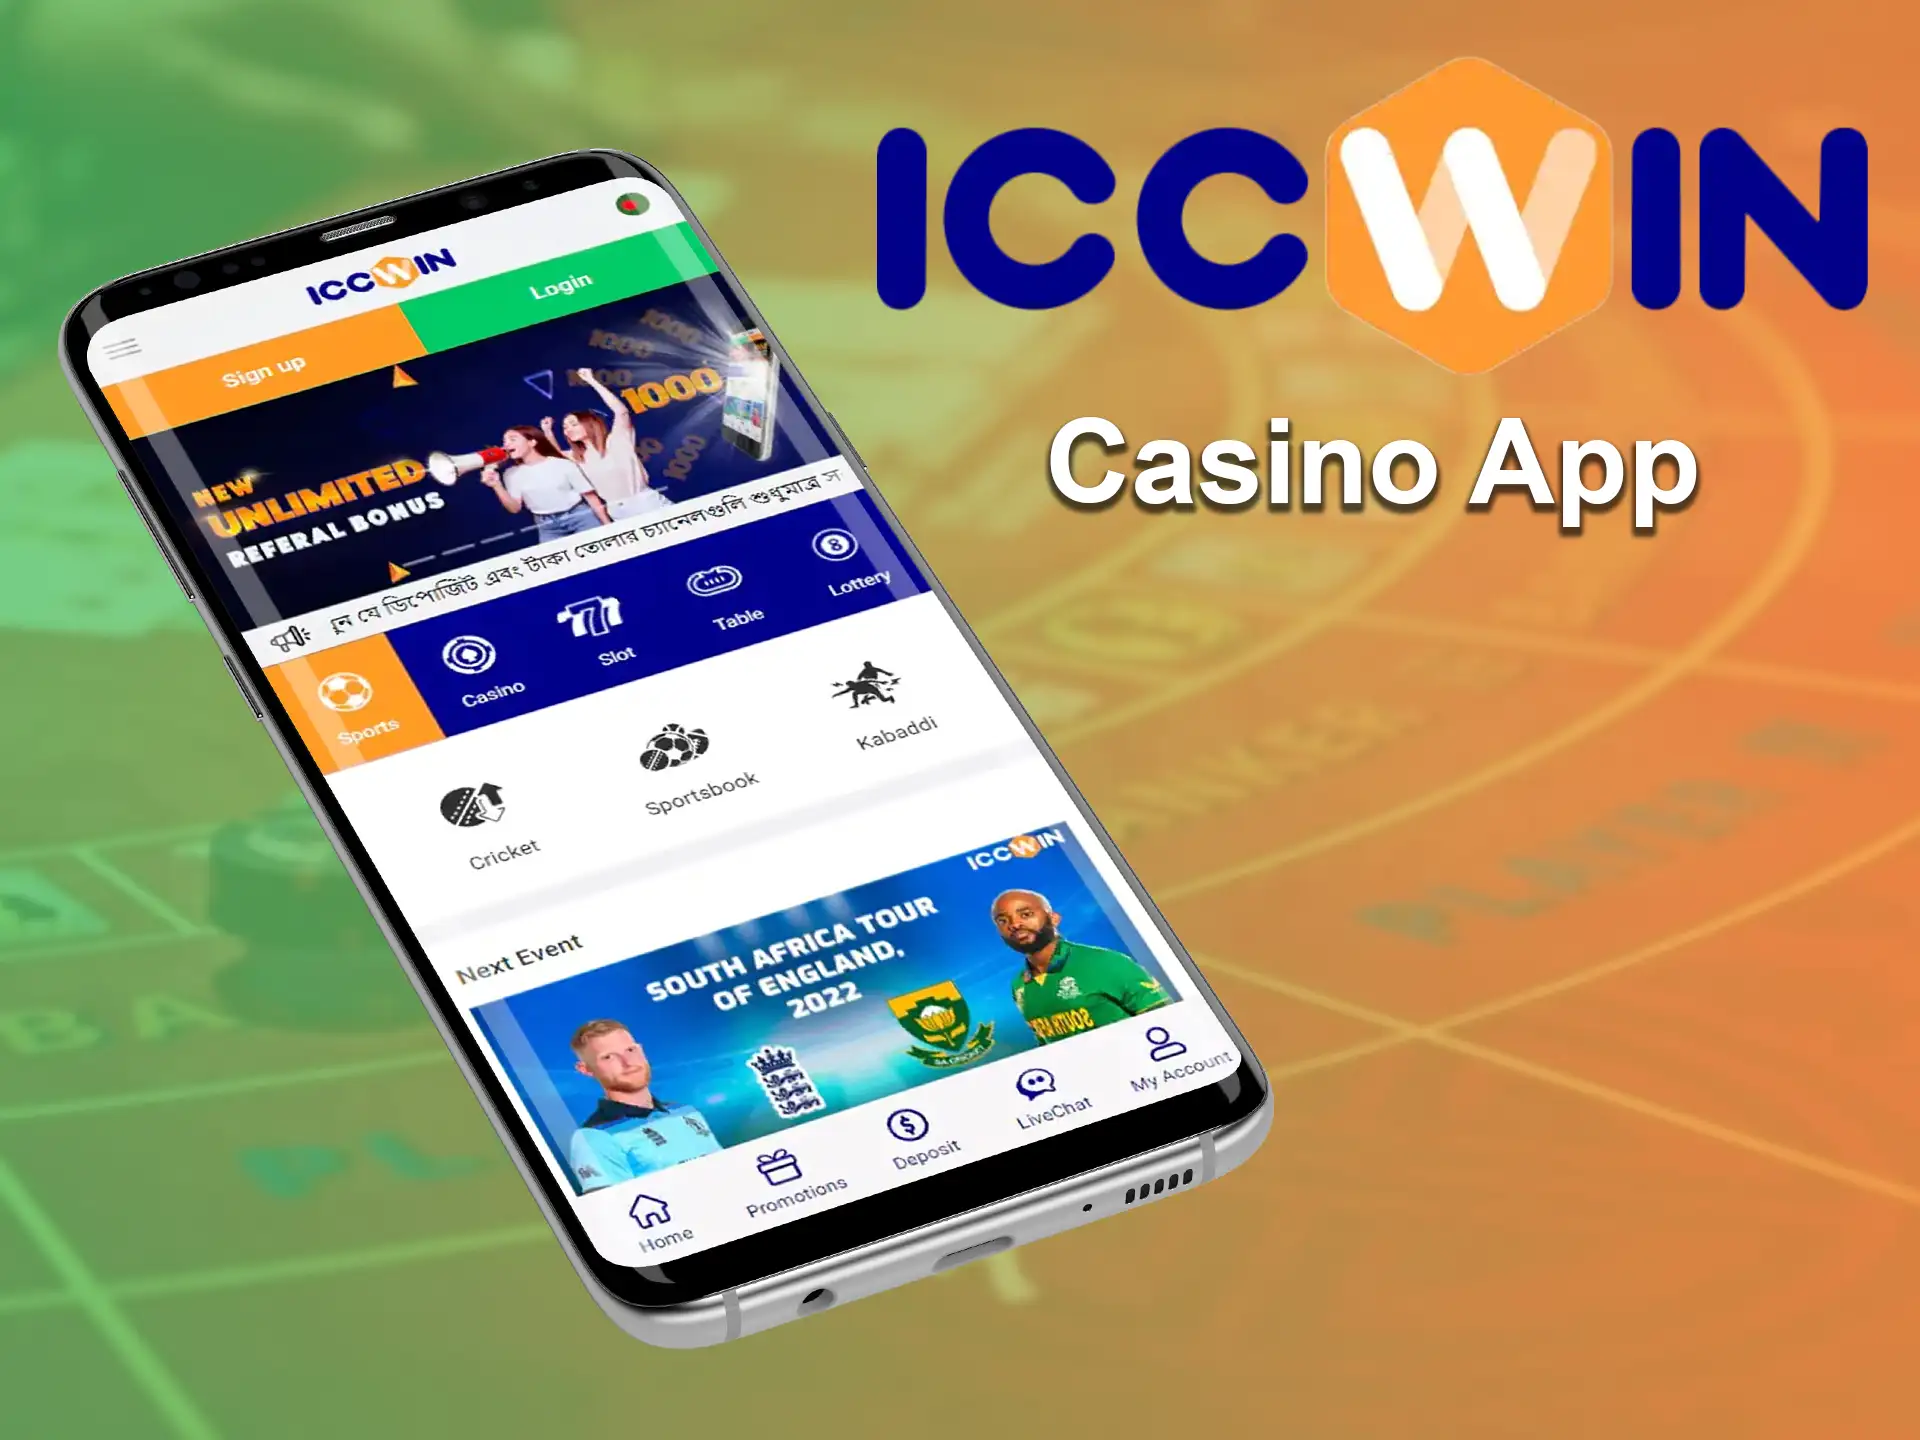 You can play at ICCWin Casino from an iOS and Android mobile device by downloading the application on the official website using the link.